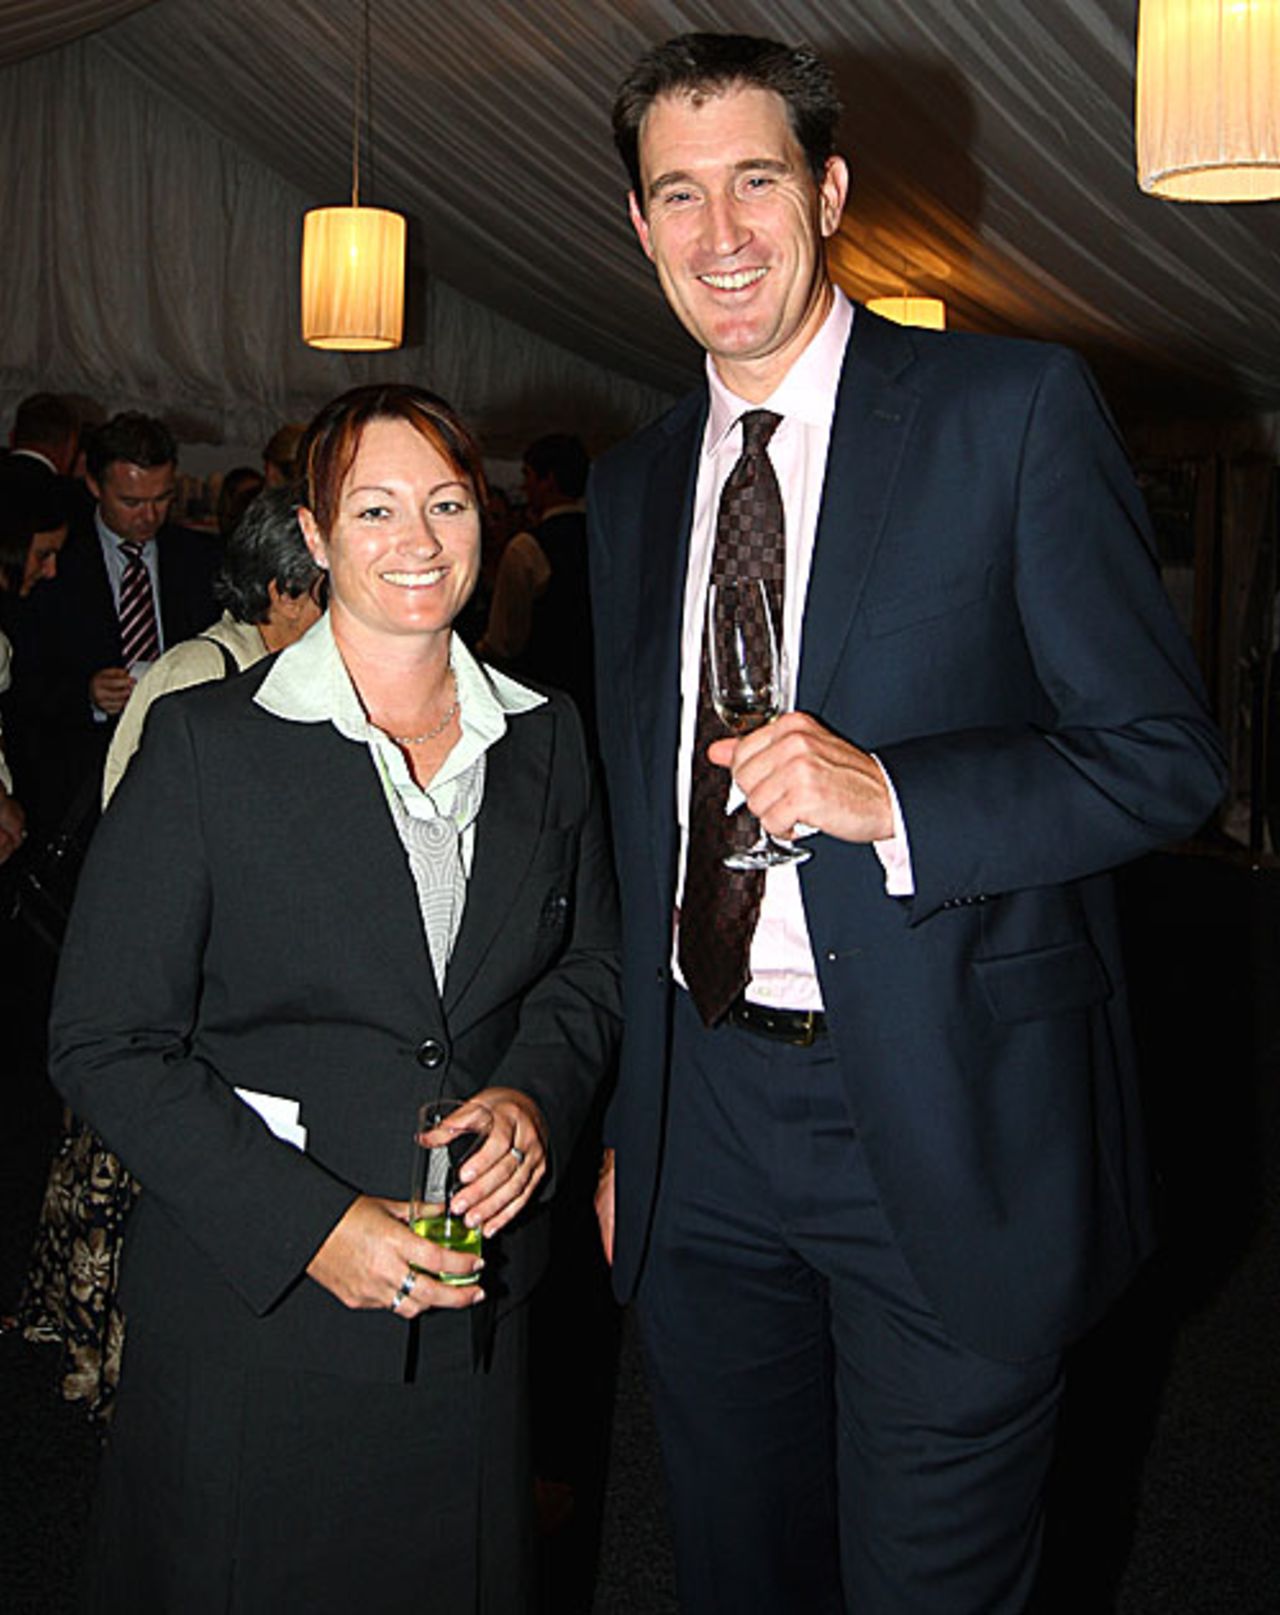 Karen Rolton and James Sutherland at the Governor General's function, Sydney, March 4, 2009